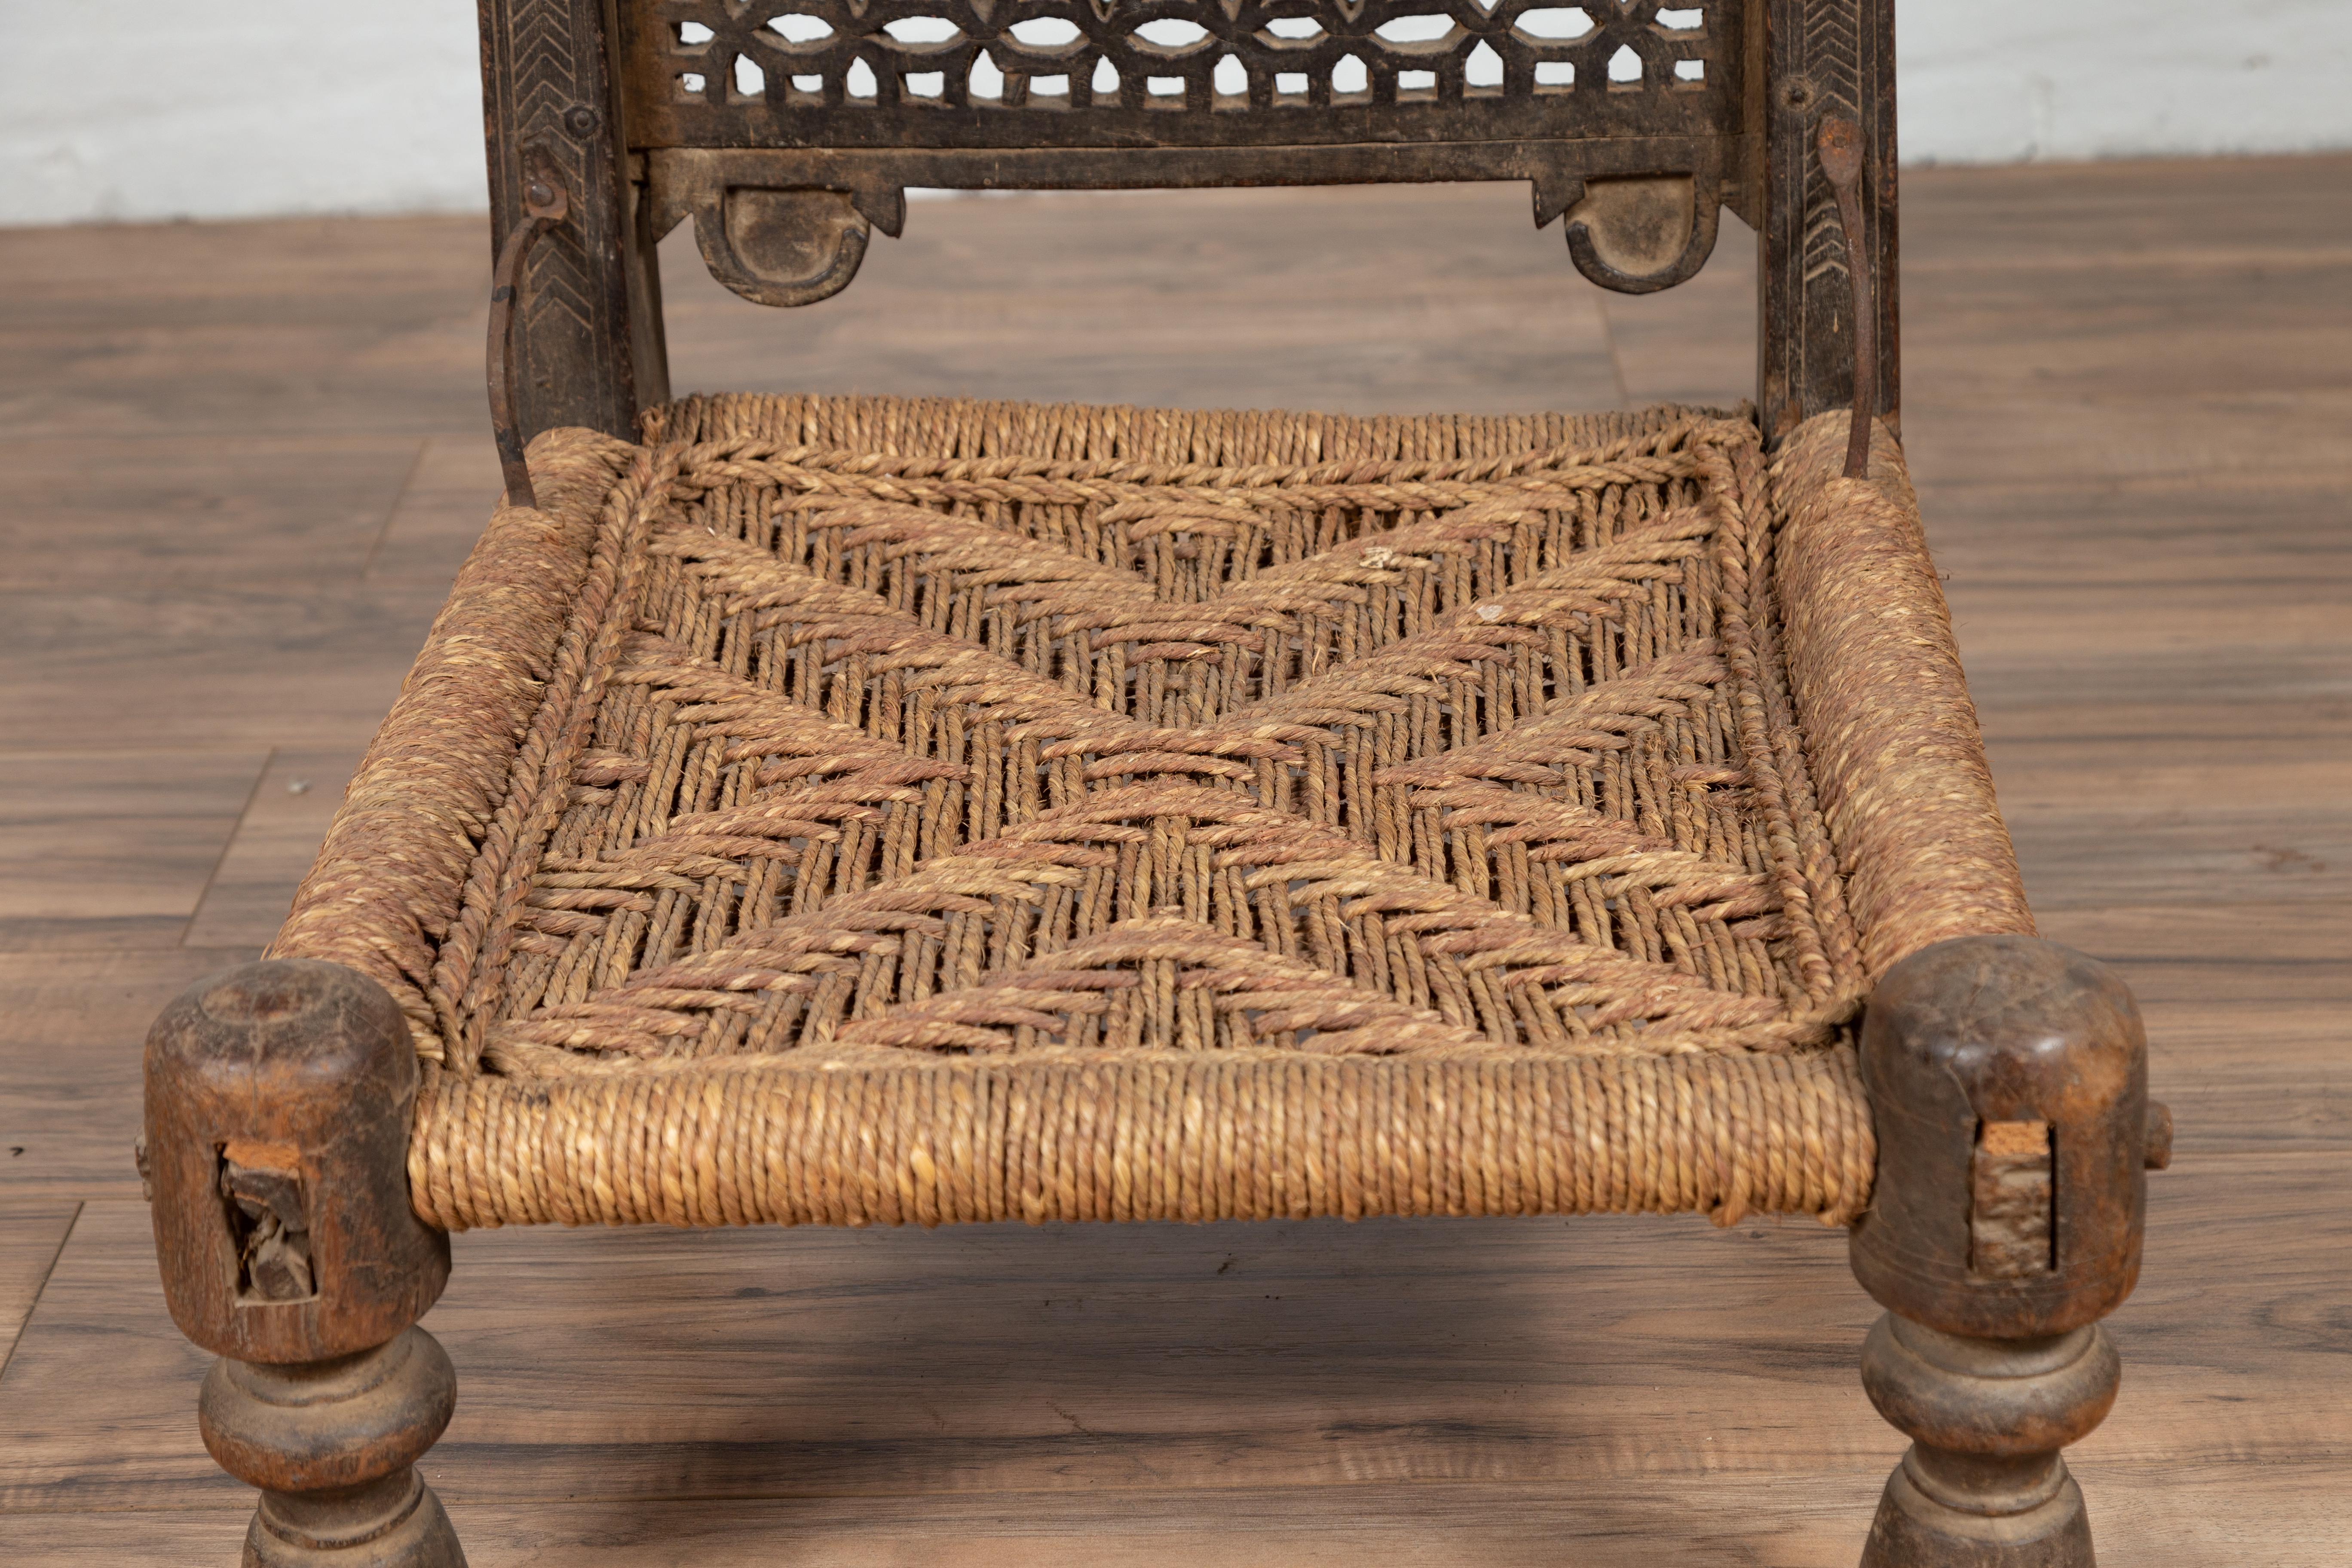 Antique Indian Rustic Low Seat Wooden Chair with Fretwork Accents and Rosettes For Sale 4